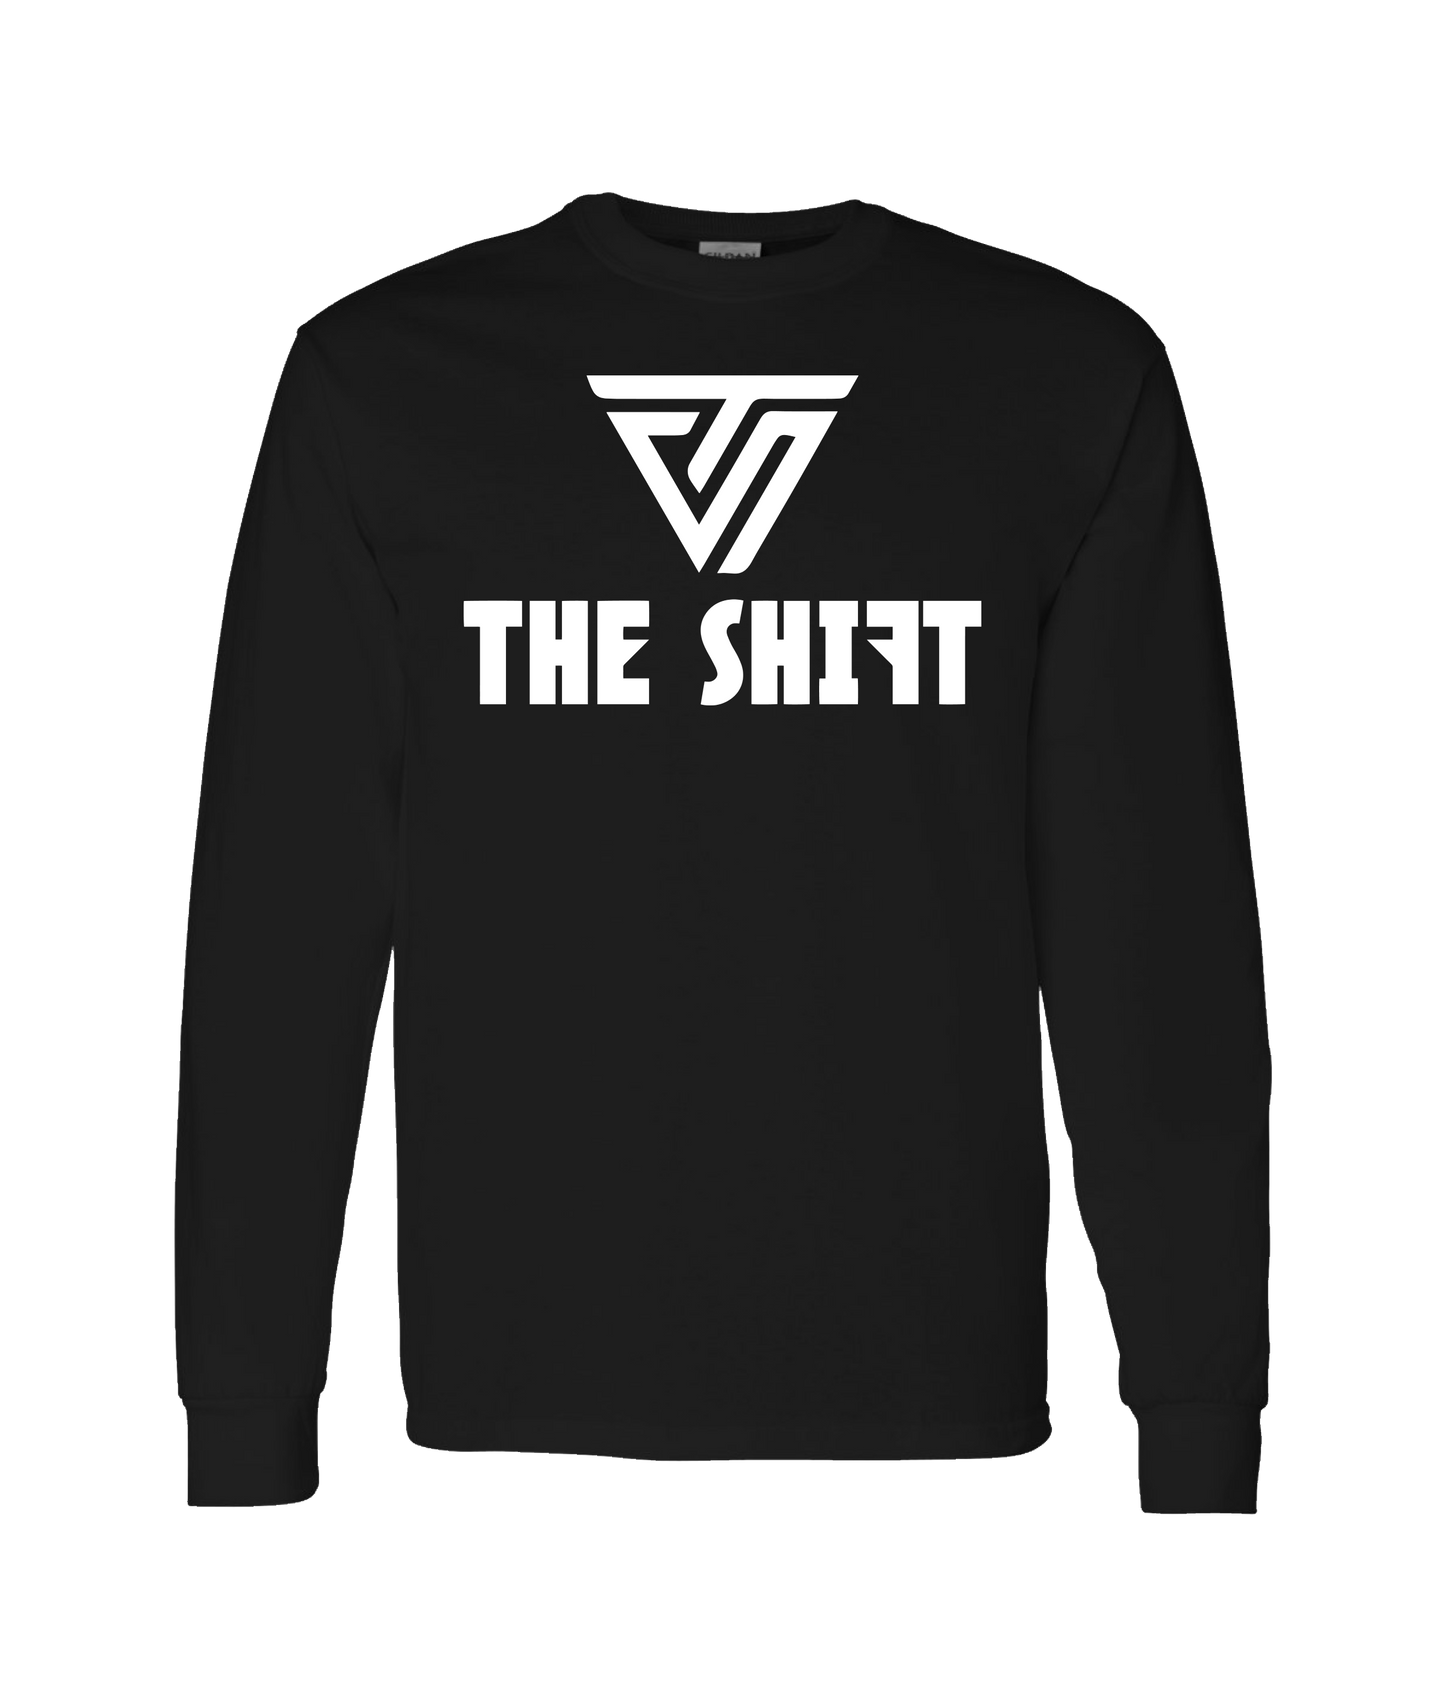 TheShift - Be The Shift - Black Long Sleeve T